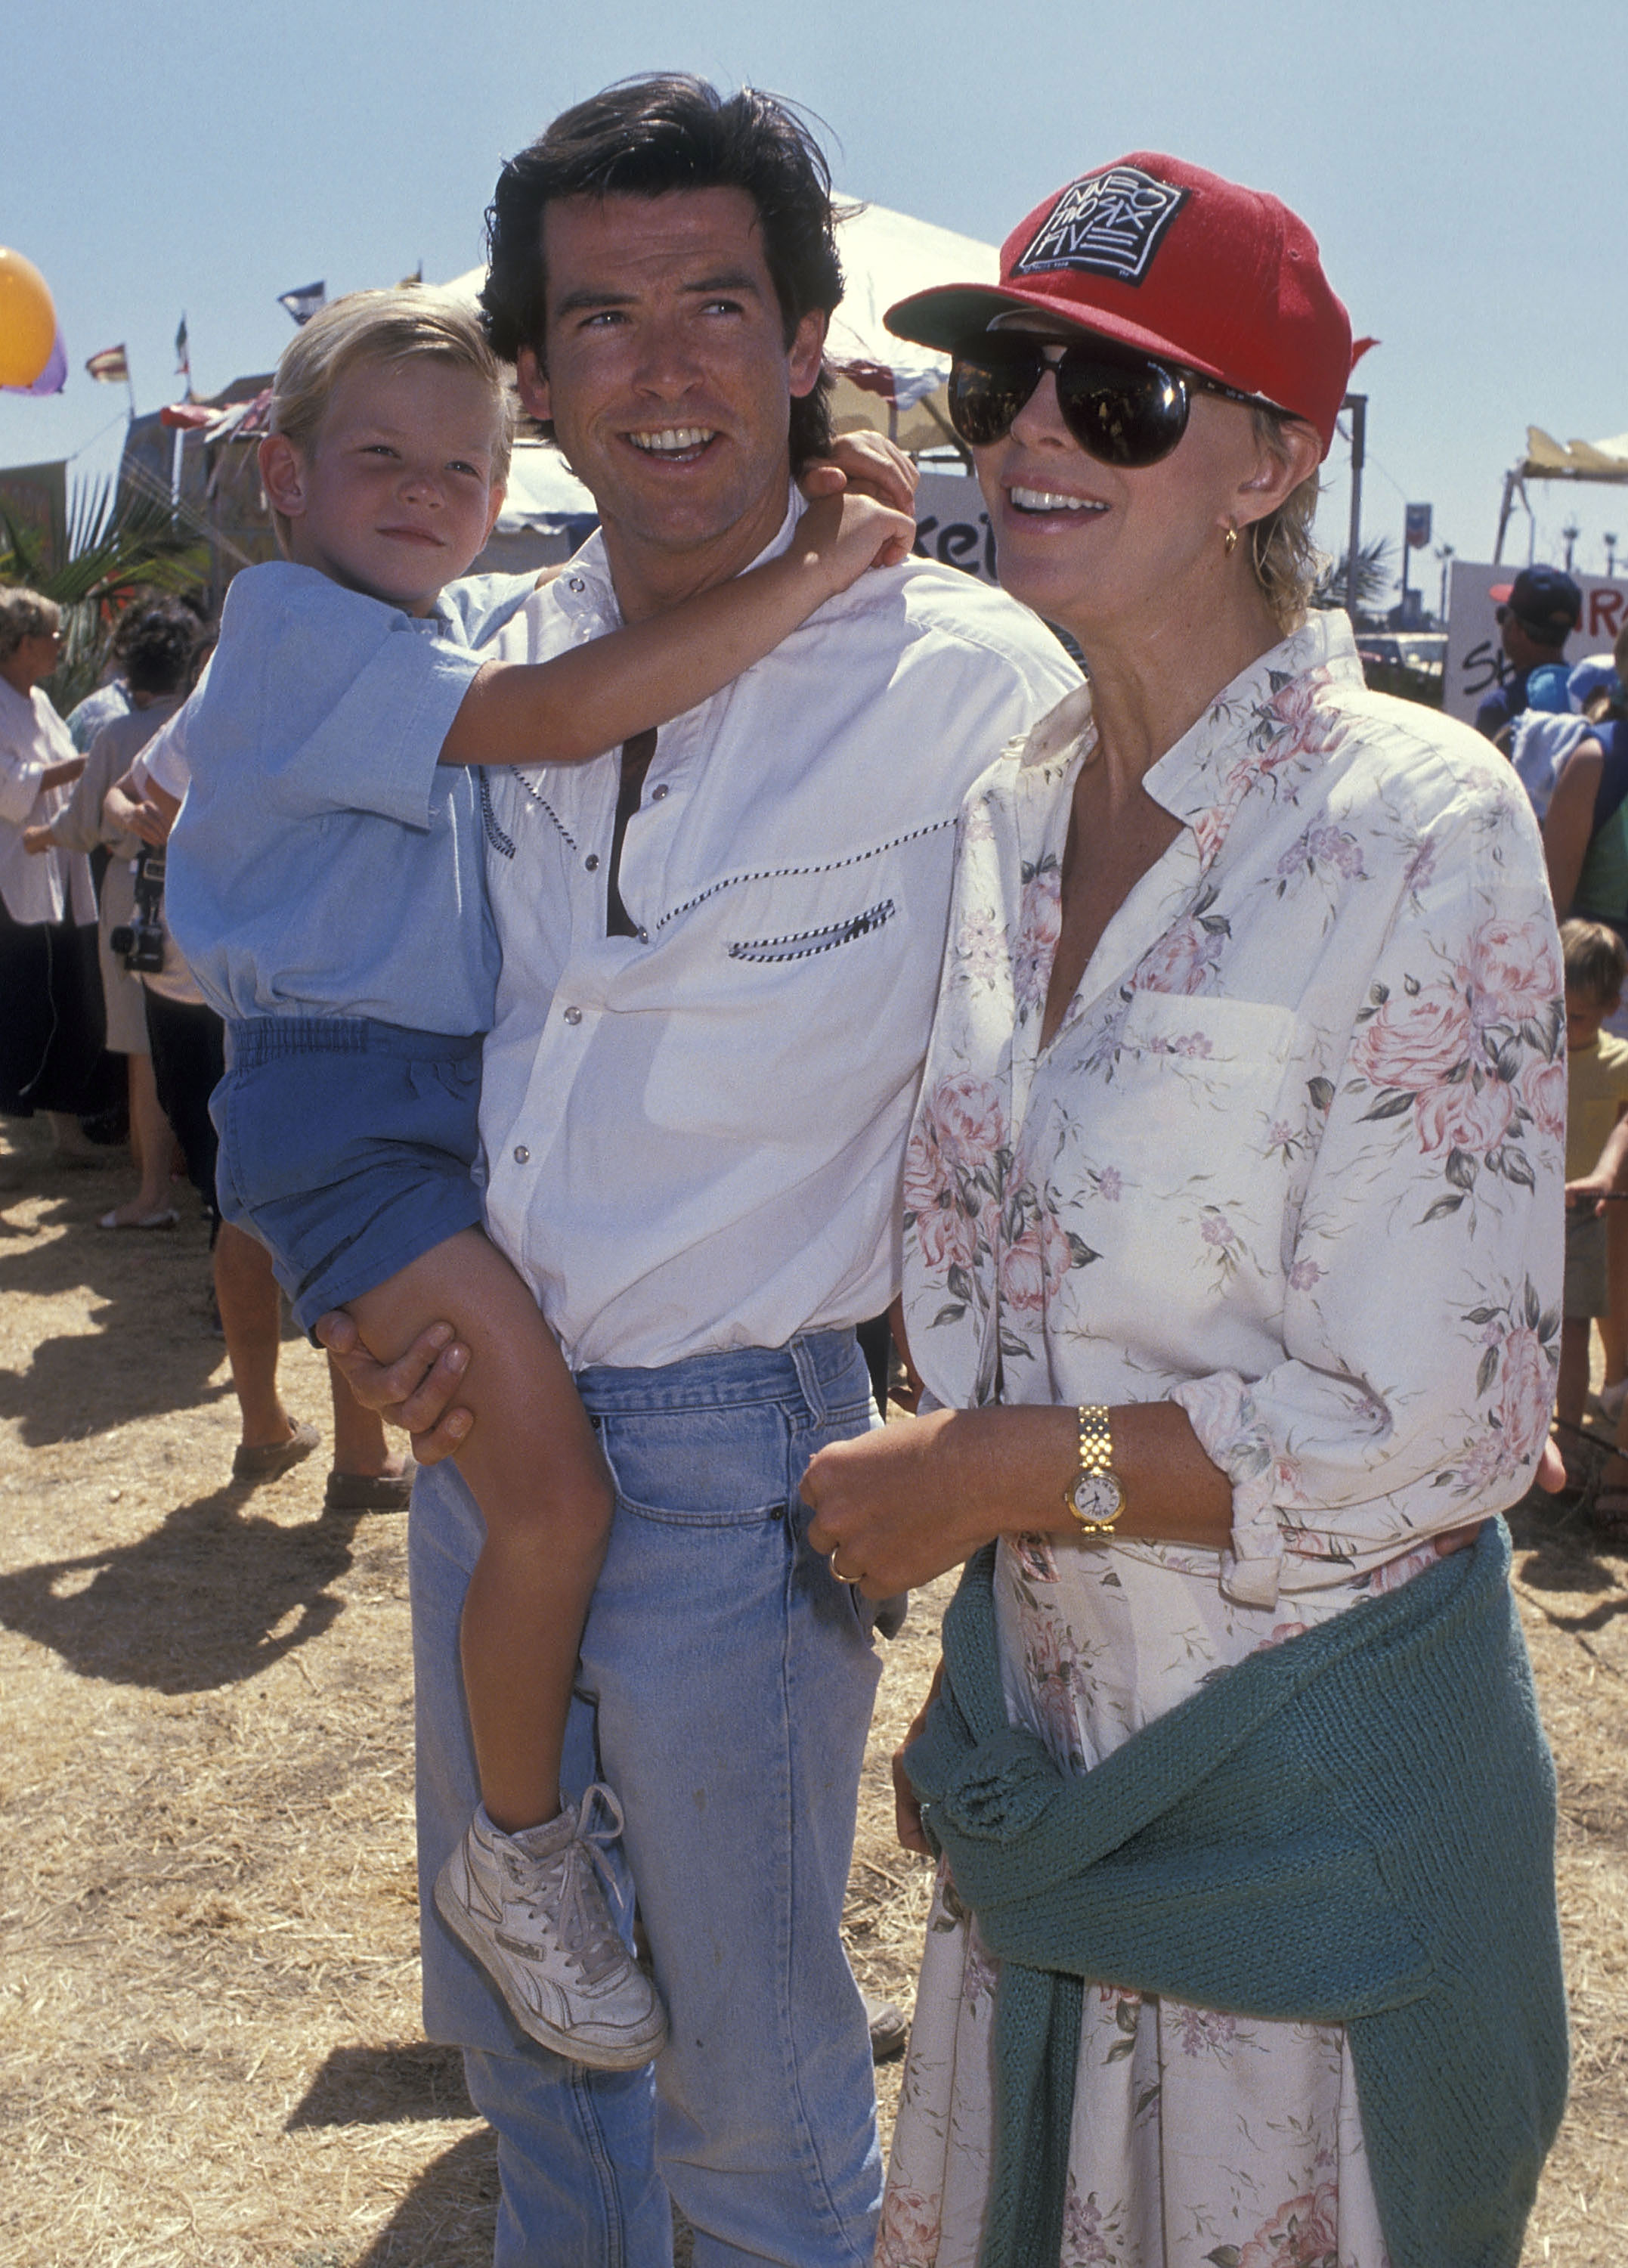 Sean Brosnan, Pierce Brosnan, and Cassandra Harris at the Eighth Annual Malibu Kiwanis Chili Cook-off Carnival and Fair on September 2, 1989, in Malibu, California | Source: Getty Images